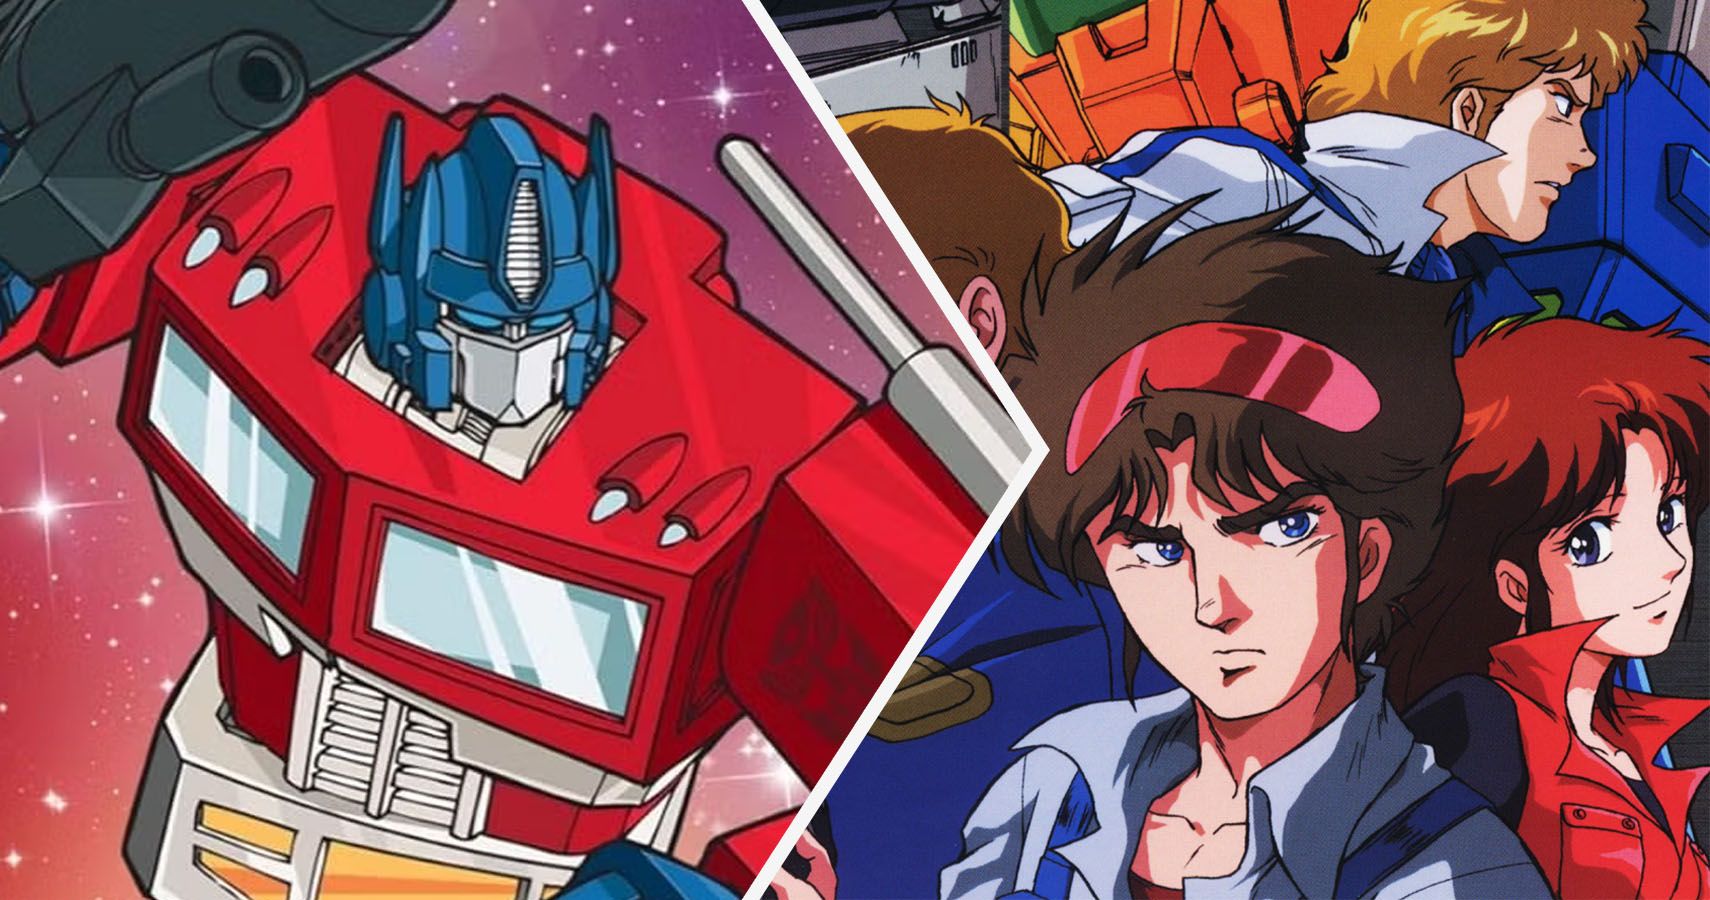 2 way split of Optimus Prime from Transformers and the cast from the Dorvack anime